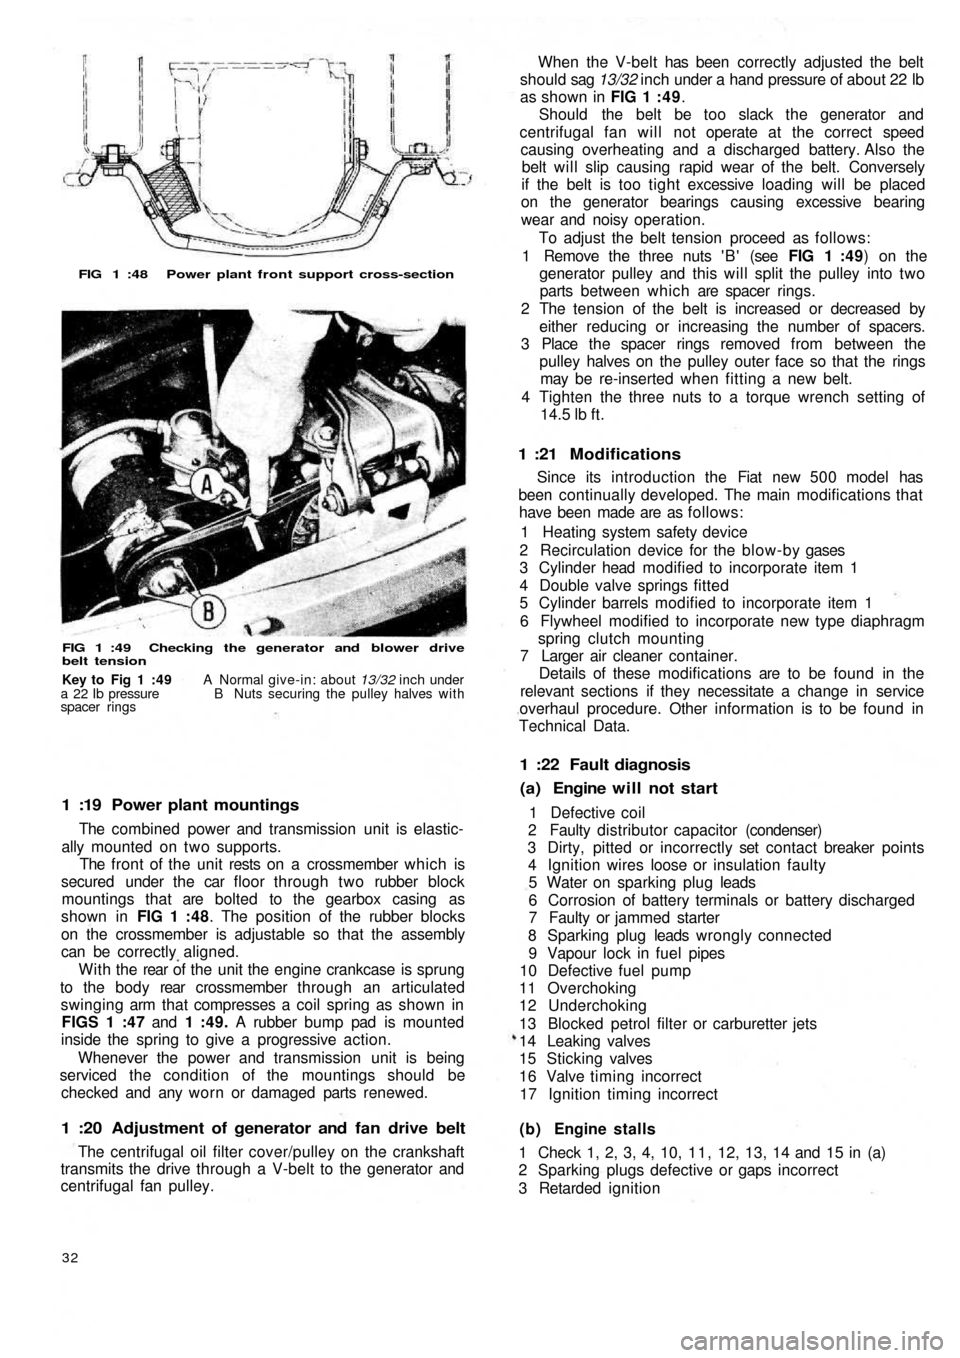 FIAT 500 1972 1.G Workshop Manual FIG 1 :48  Power plant front support cross-section
FIG 1 :49  Checking  the generator and  blower drive
belt tension
1 :19  Power plant mountings
The combined power and transmission unit is elastic-
a